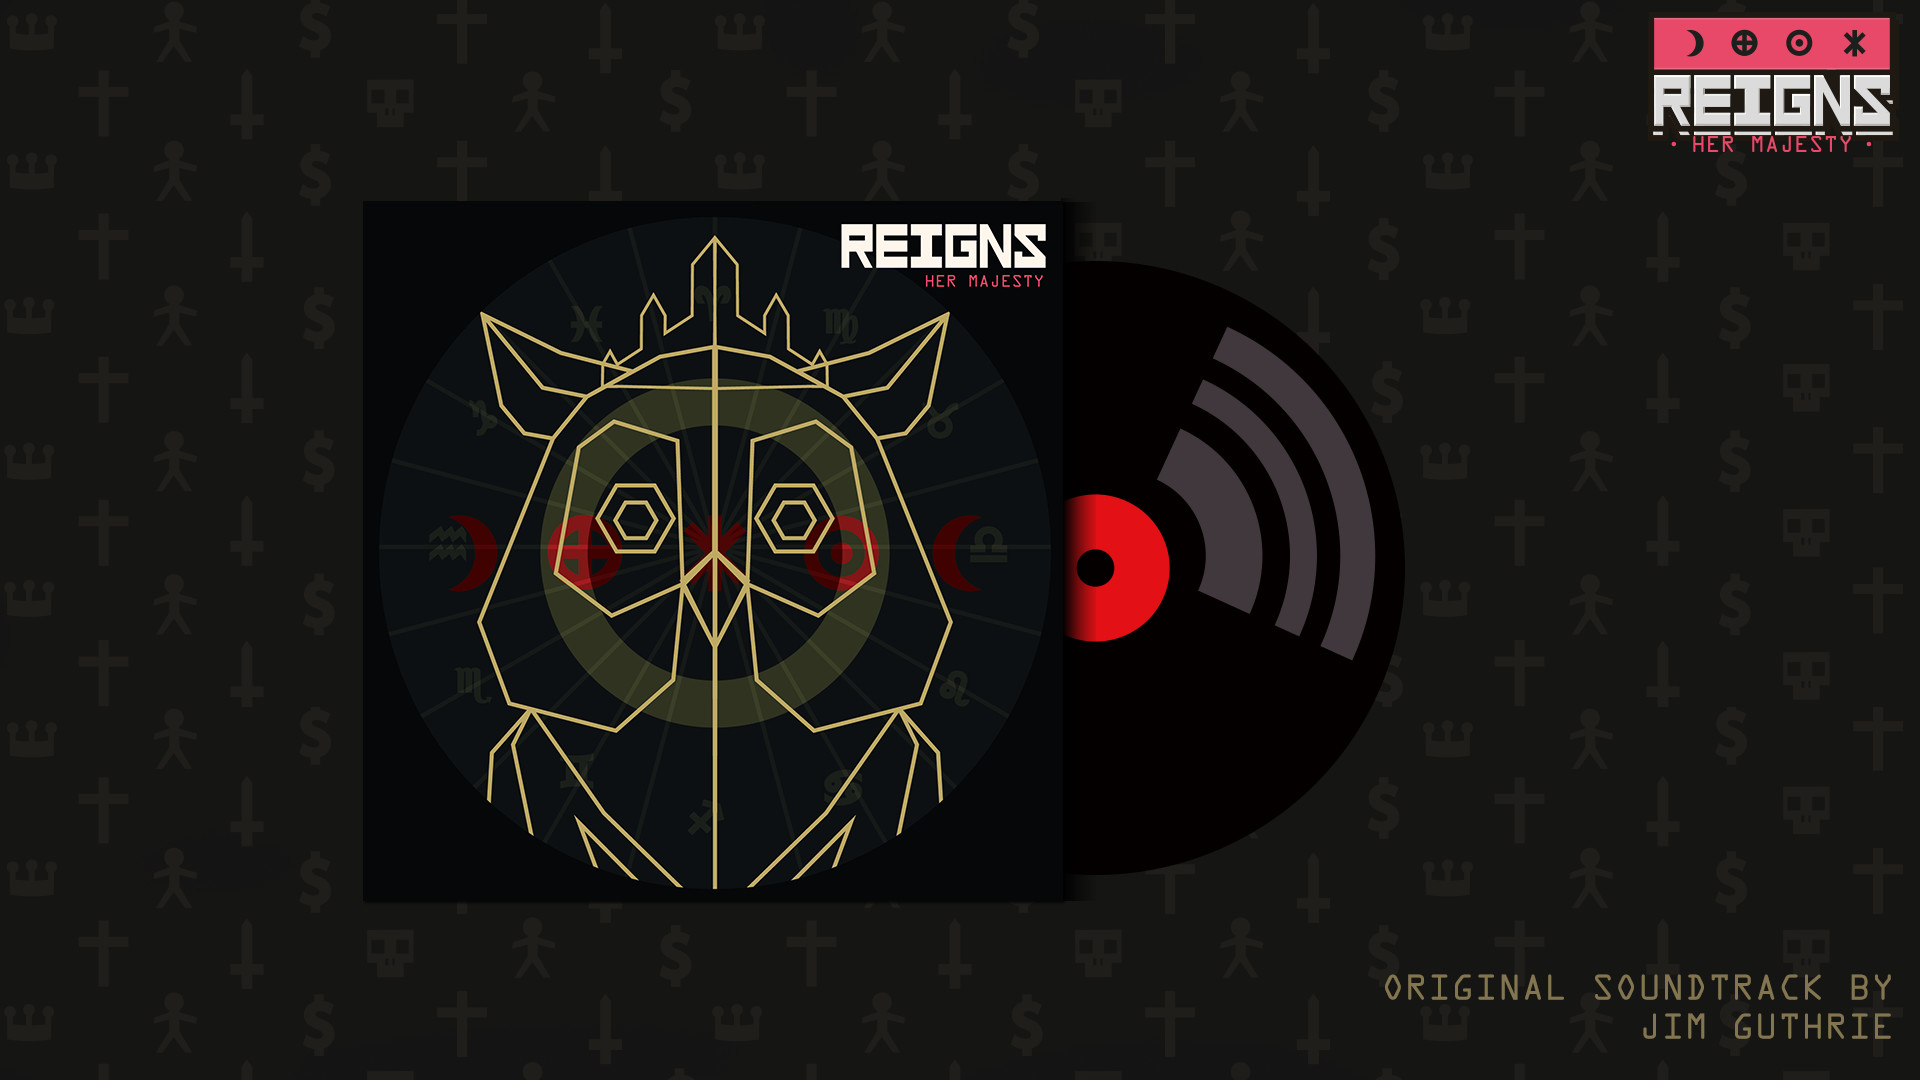 reign her majesty download free